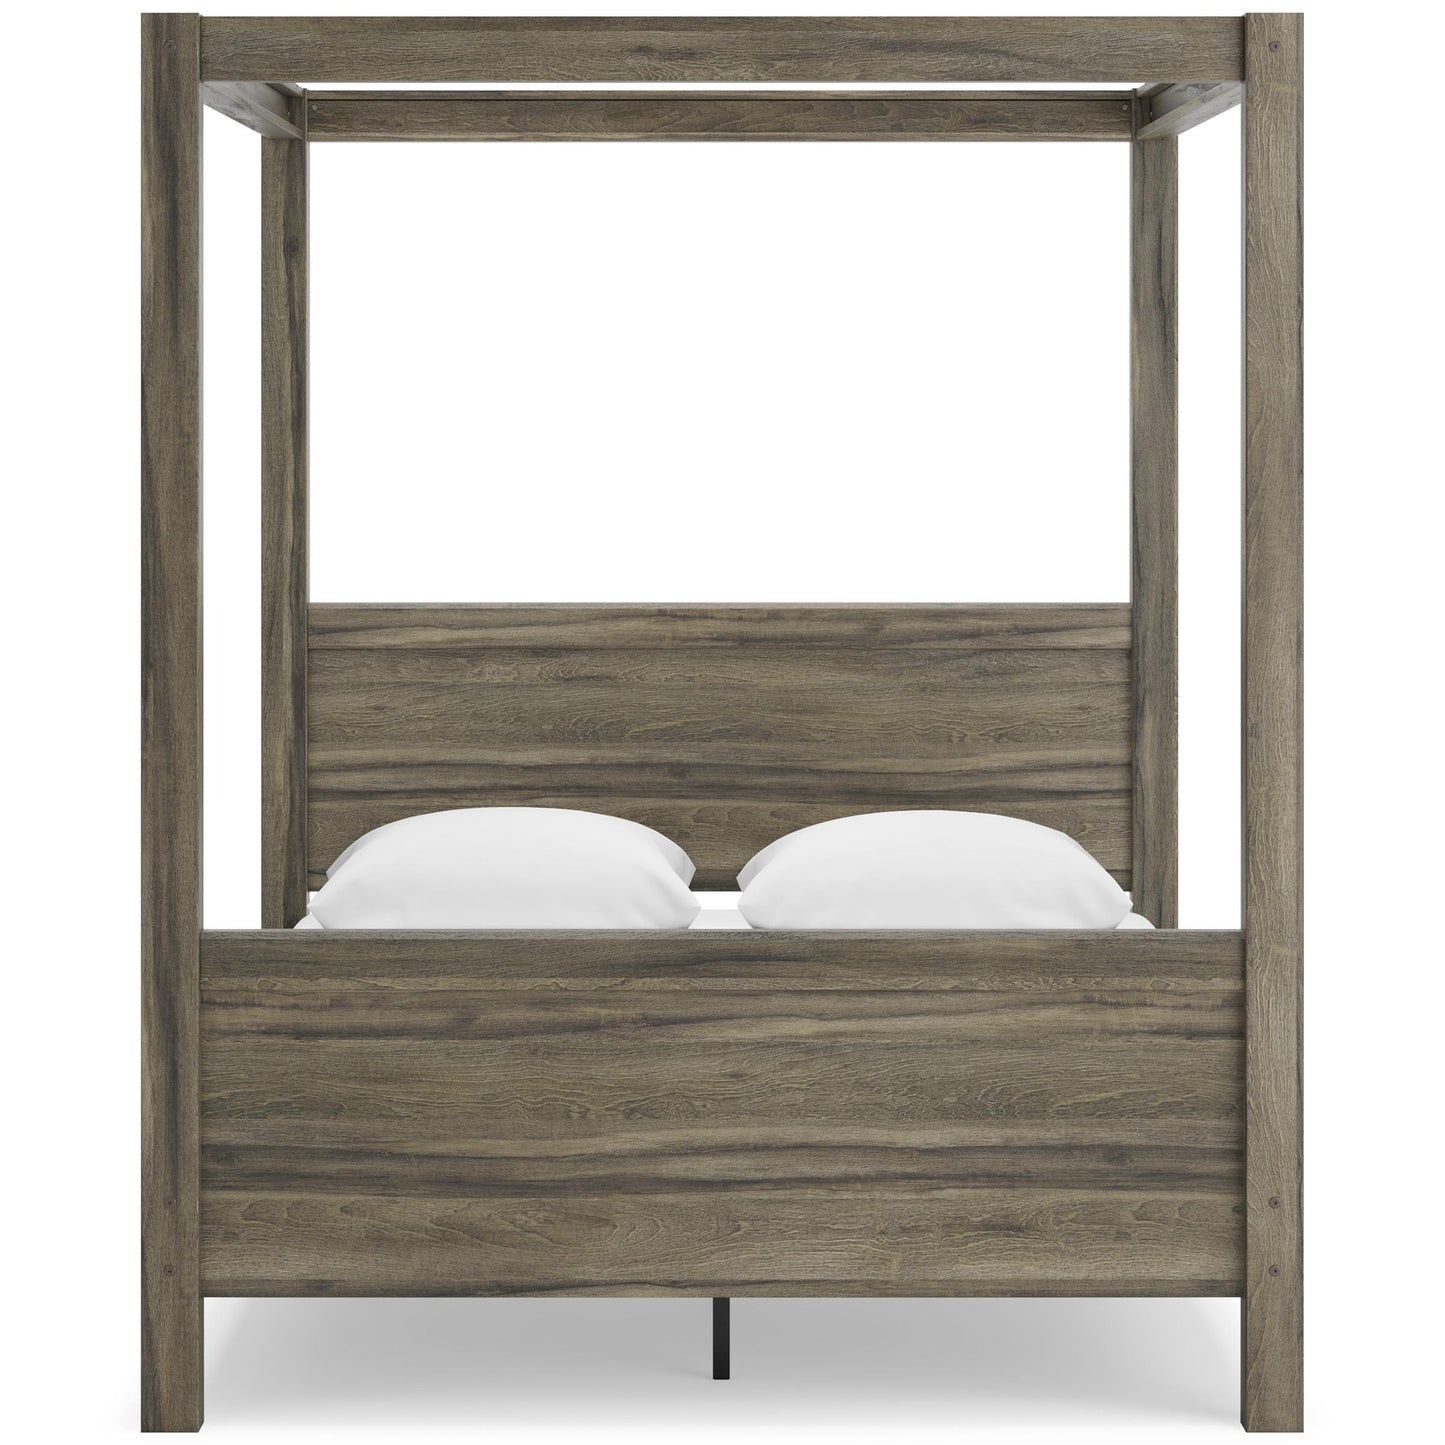 Signature Design by Ashley Shallifer Queen Canopy Bed EB1104-171/EB1104-161/EB1104-198 IMAGE 2